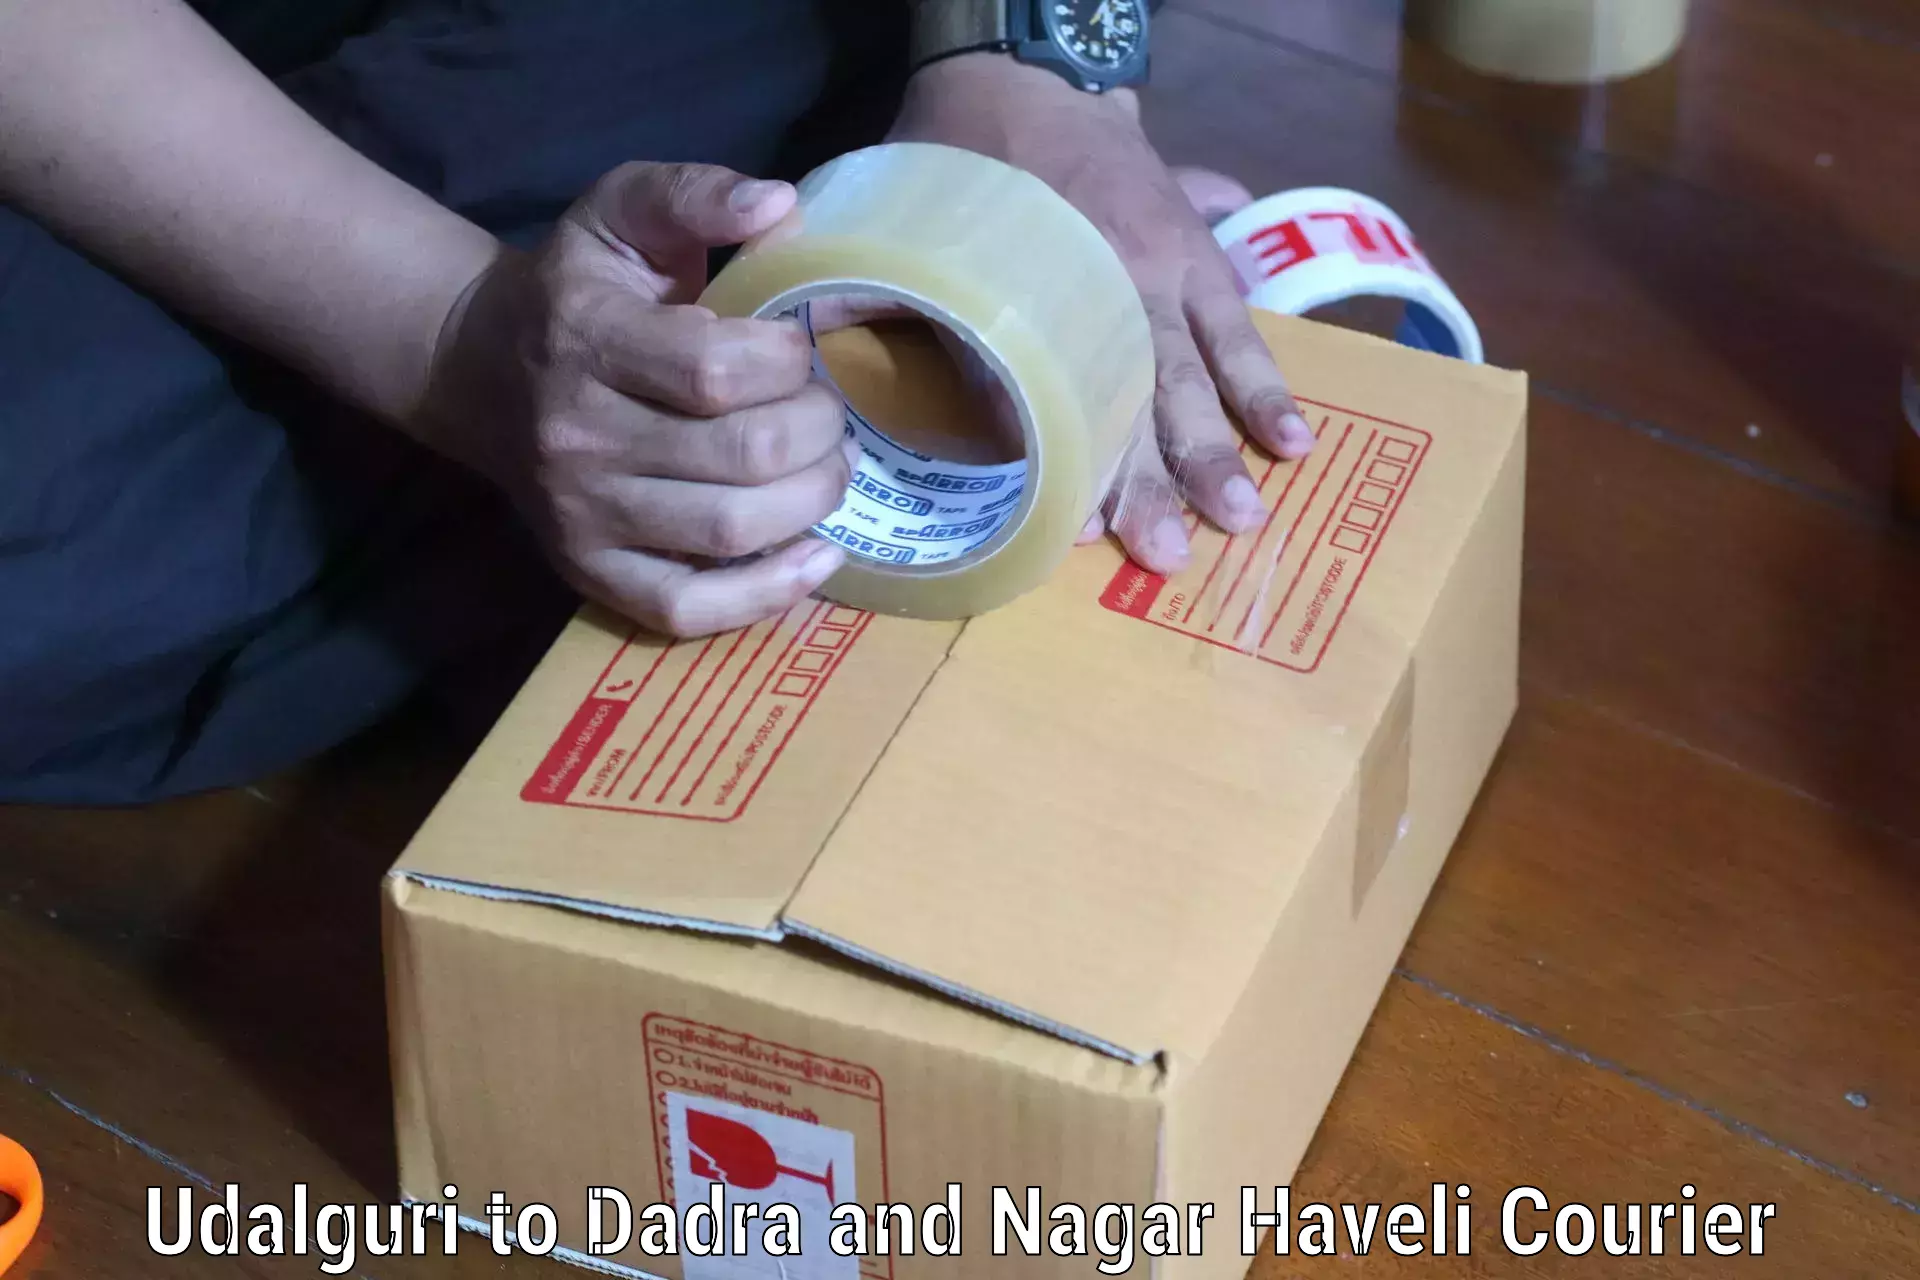 Courier rate comparison in Udalguri to Dadra and Nagar Haveli